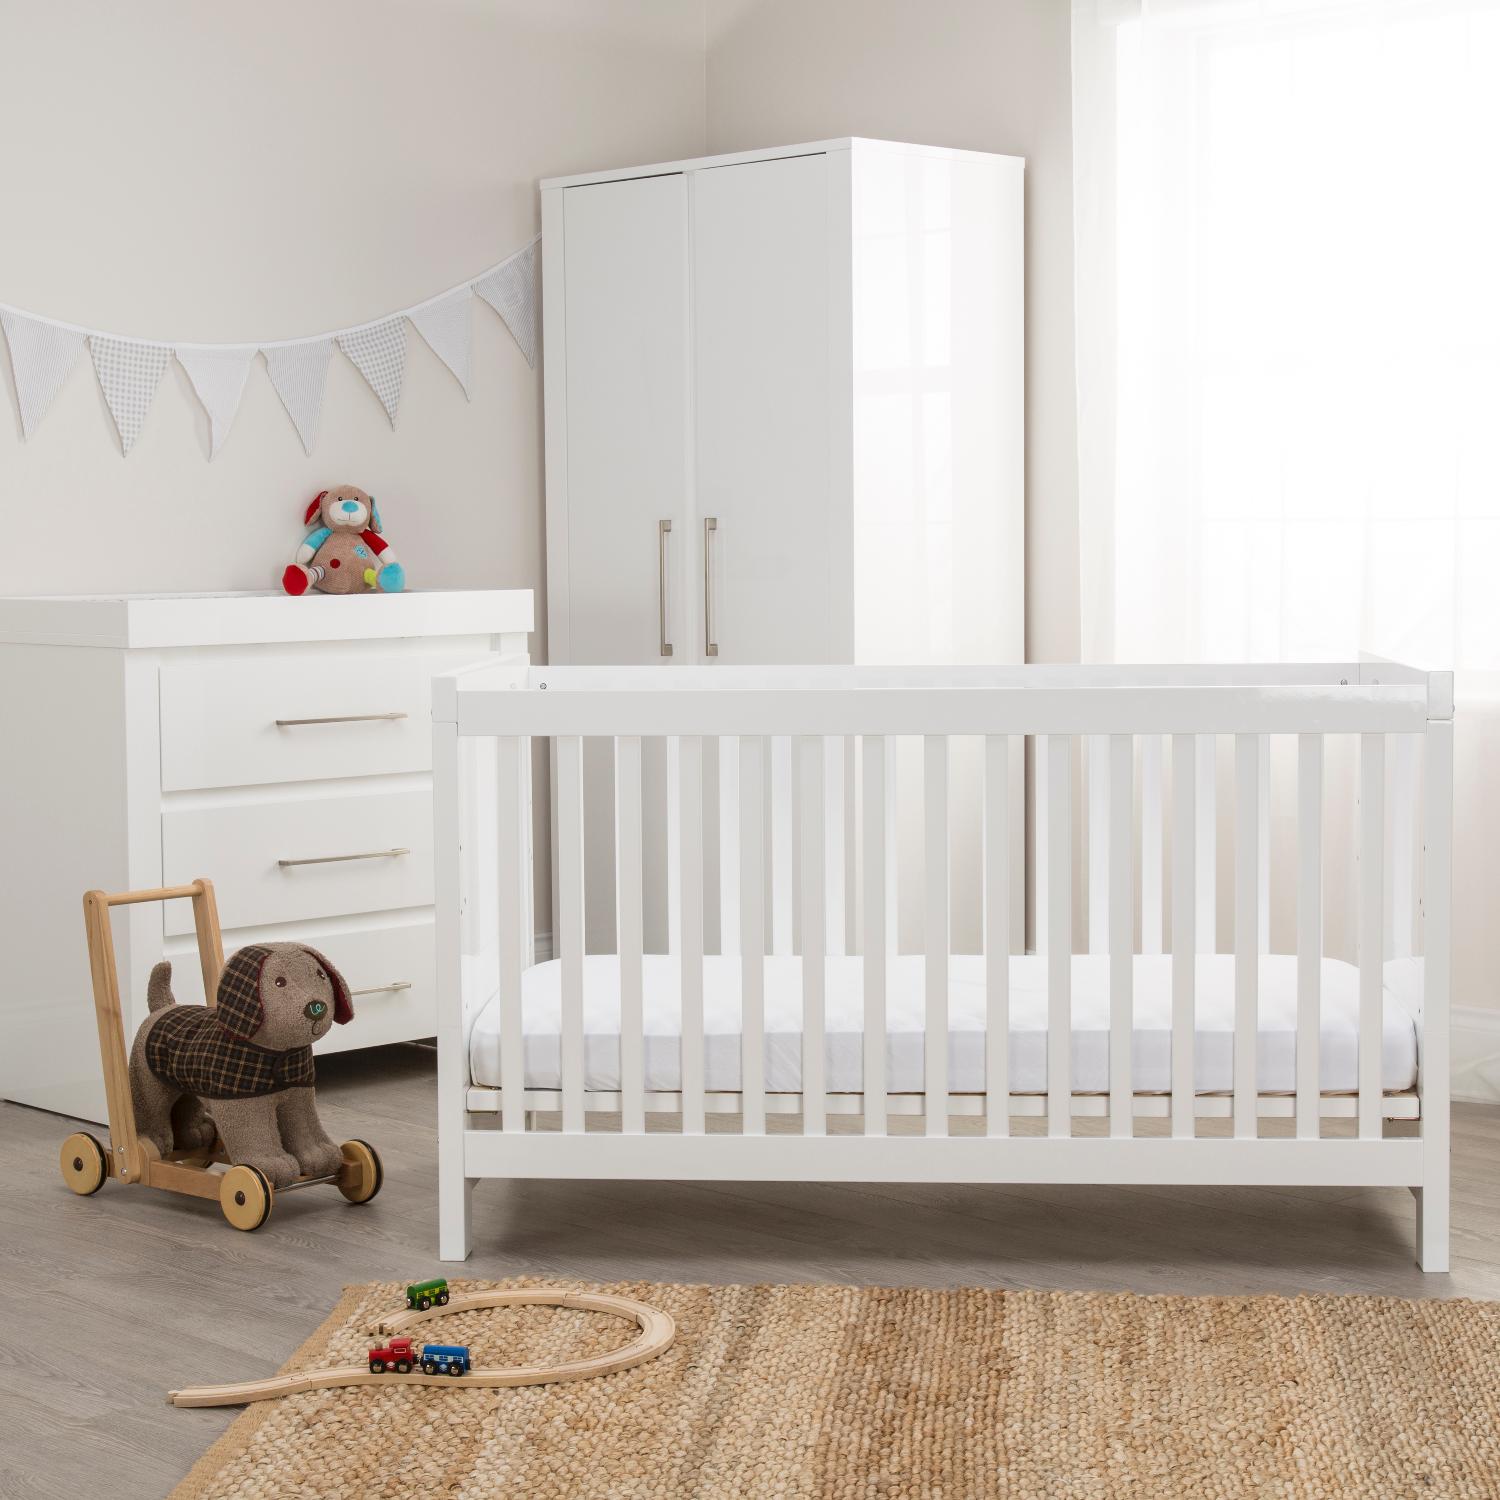 furniture : baby nursery furniture sets wooden get really magical TWBVZHC